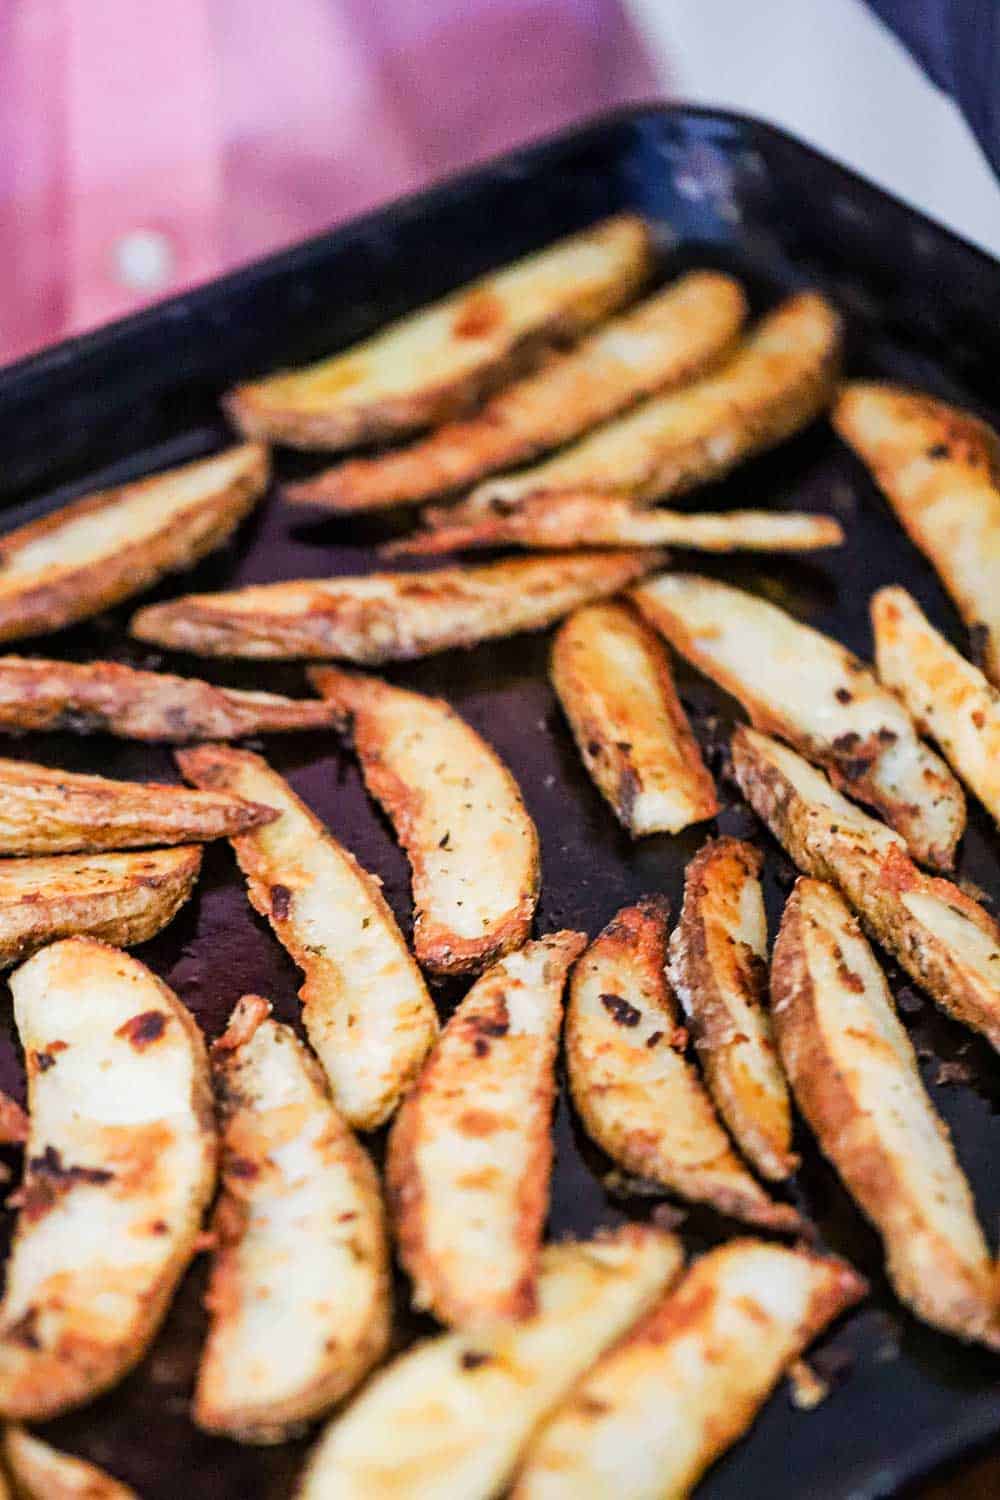 A baking sheet filled with potato wedges that have been roasted.